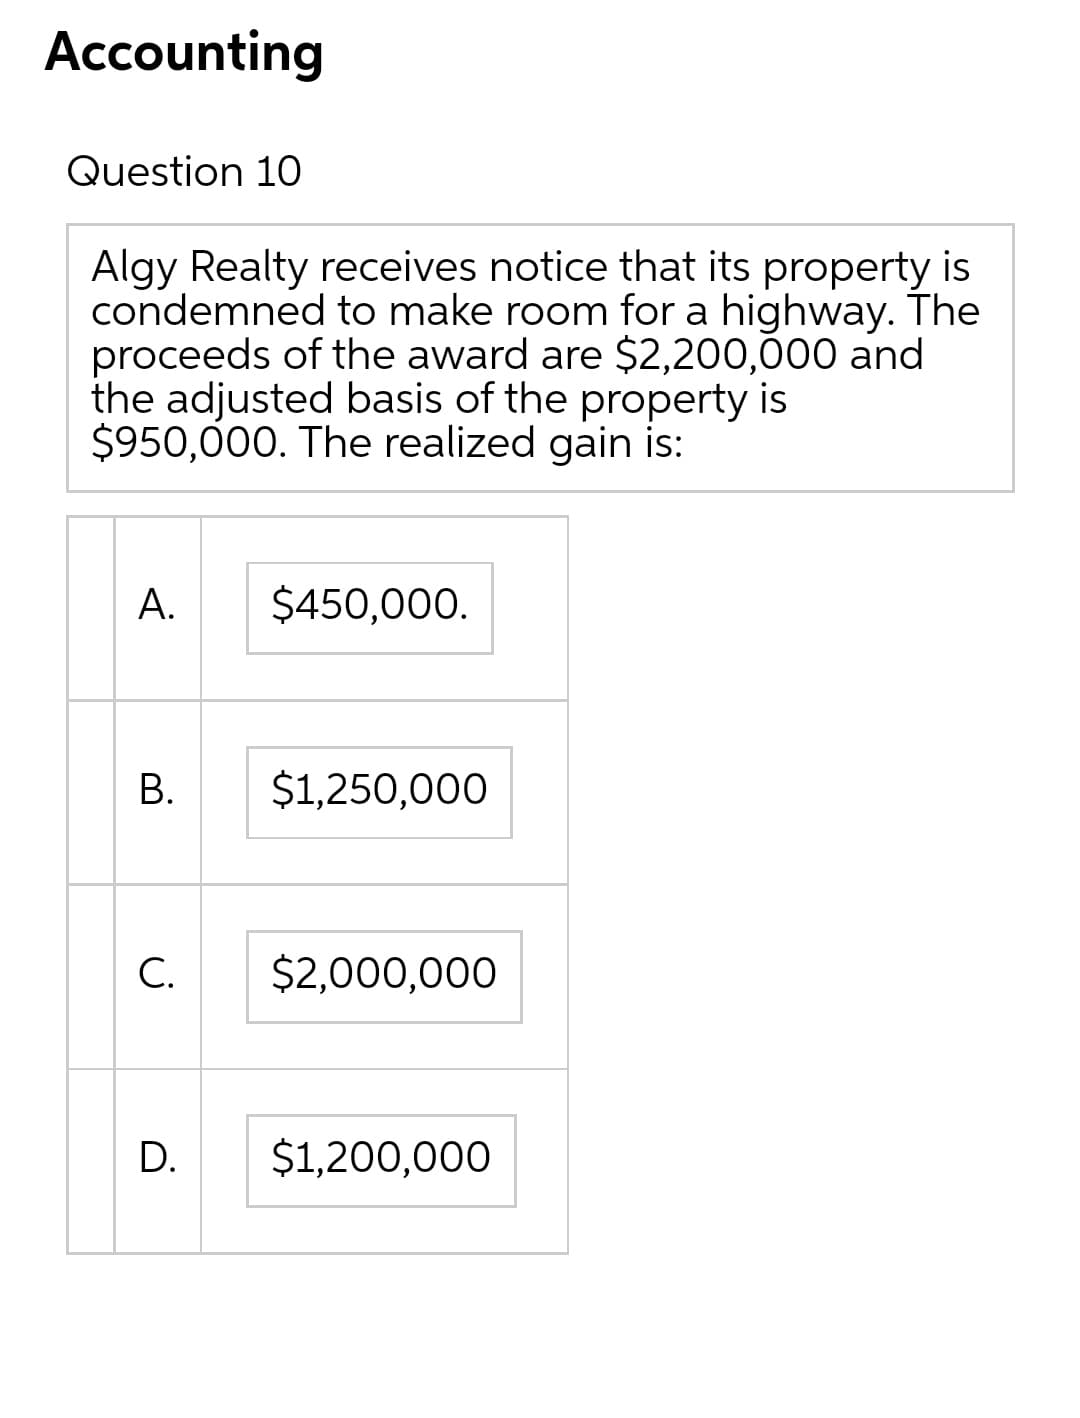 Accounting
Question 10
Algy Realty receives notice that its property is
condemned to make room for a highway. The
proceeds of the award are $2,200,000 and
the adjusted basis of the property is
$950,000. The realized gain is:
А.
$450,000.
В.
$1,250,000
С.
$2,000,000
D.
$1,200,000
B.
